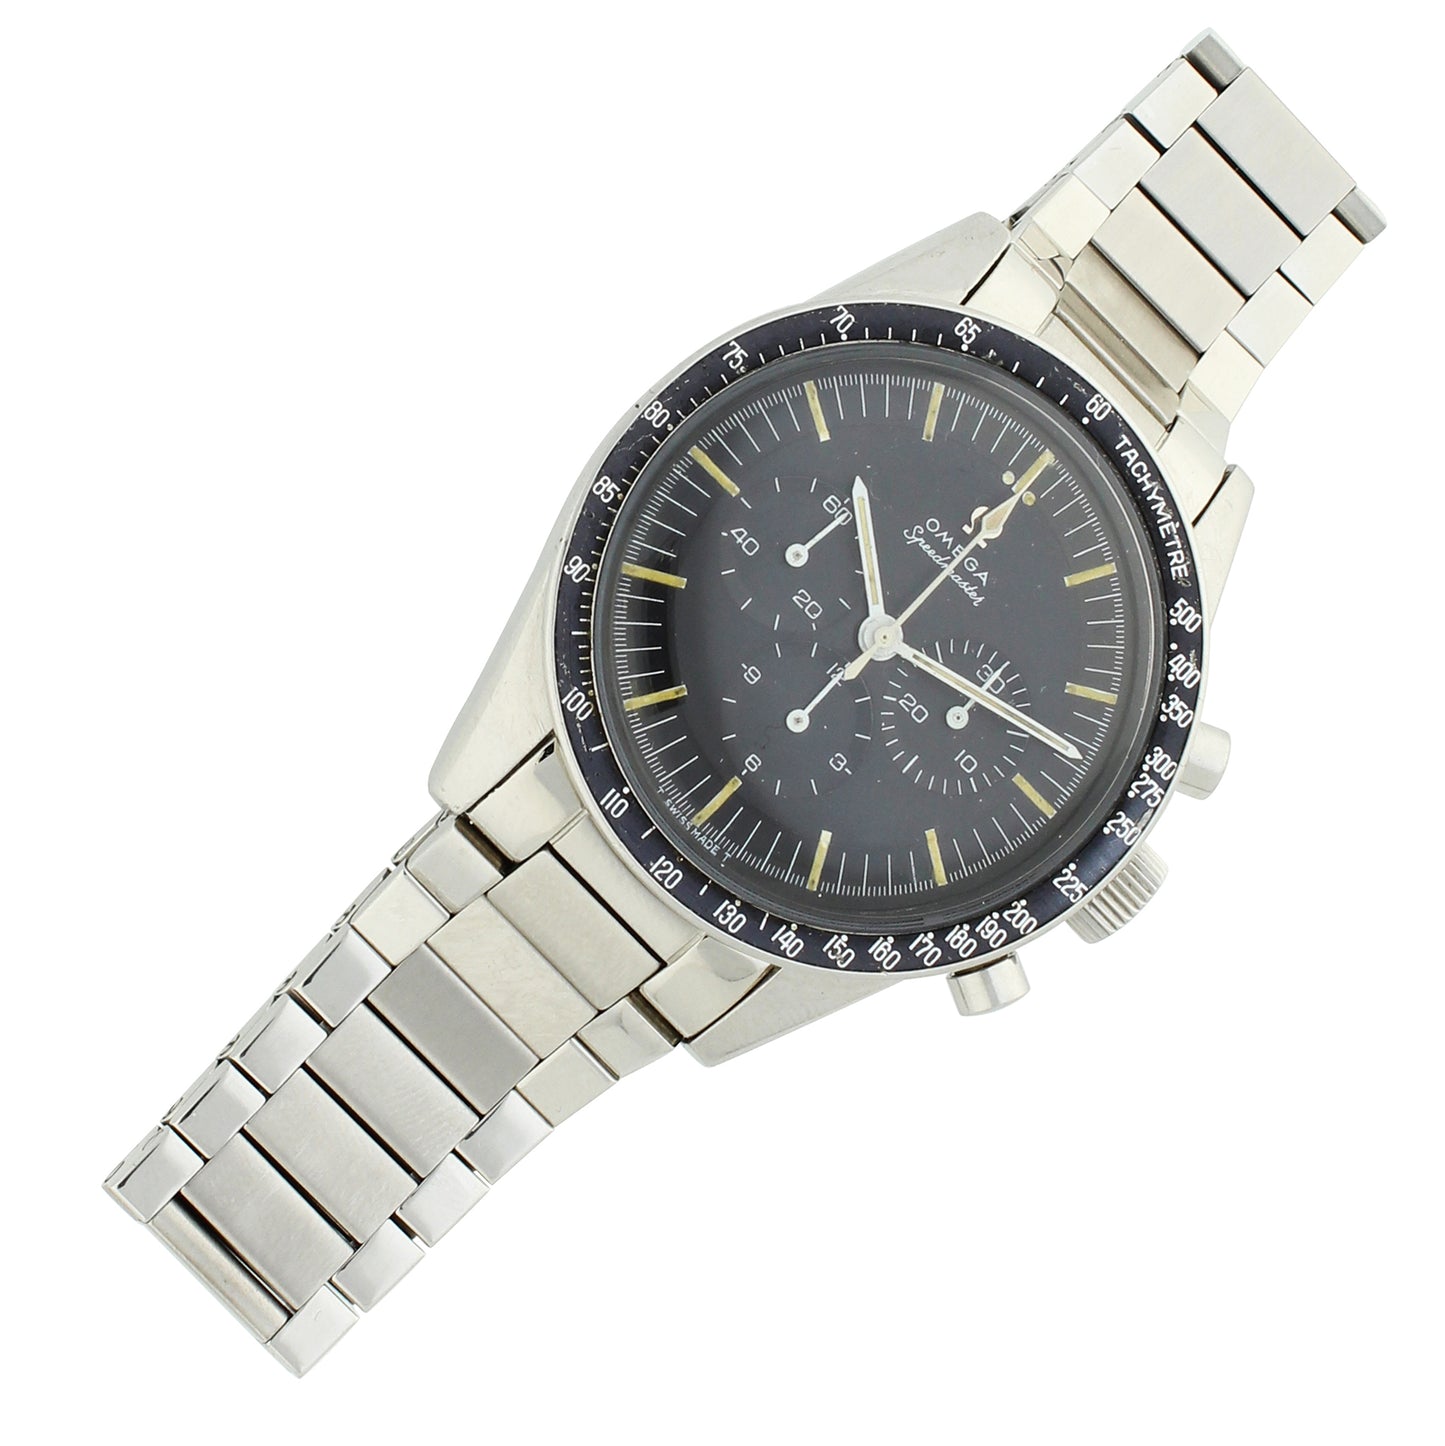 Stainless steel Speedmaster, reference 105.003 'Ed White' chronograph wristwatch. Made 1968